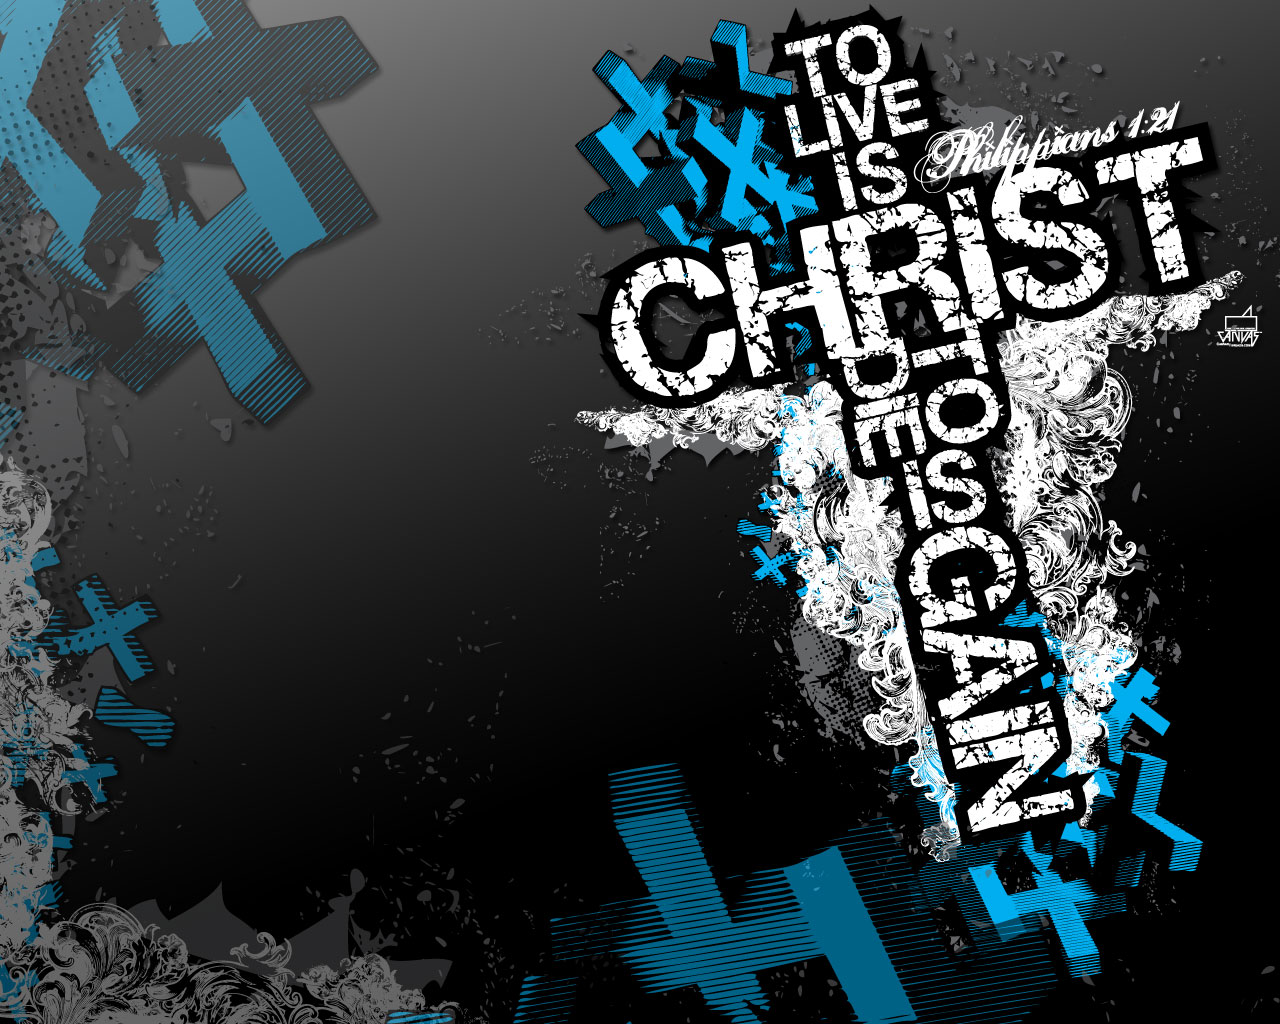  christian wallpaper backgrounds in hd christian wallpaper backgrounds